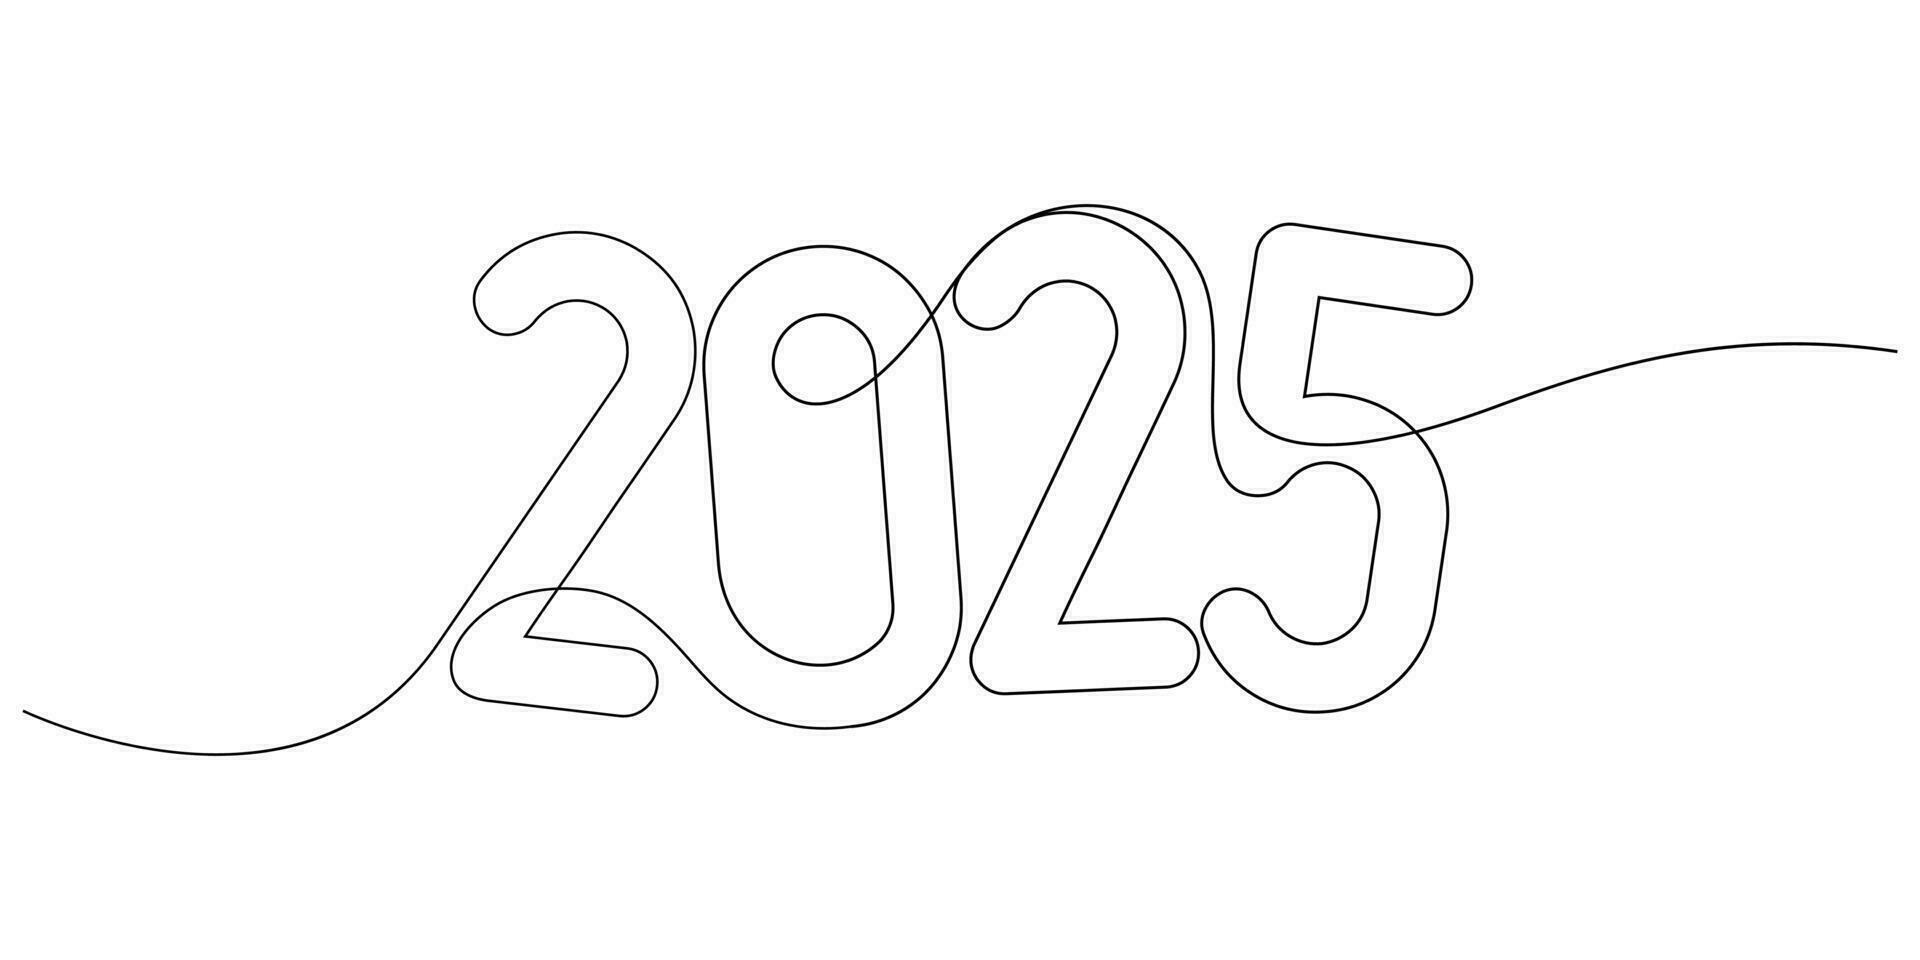 continuous line drawing 2025 number design logo minimalism vector